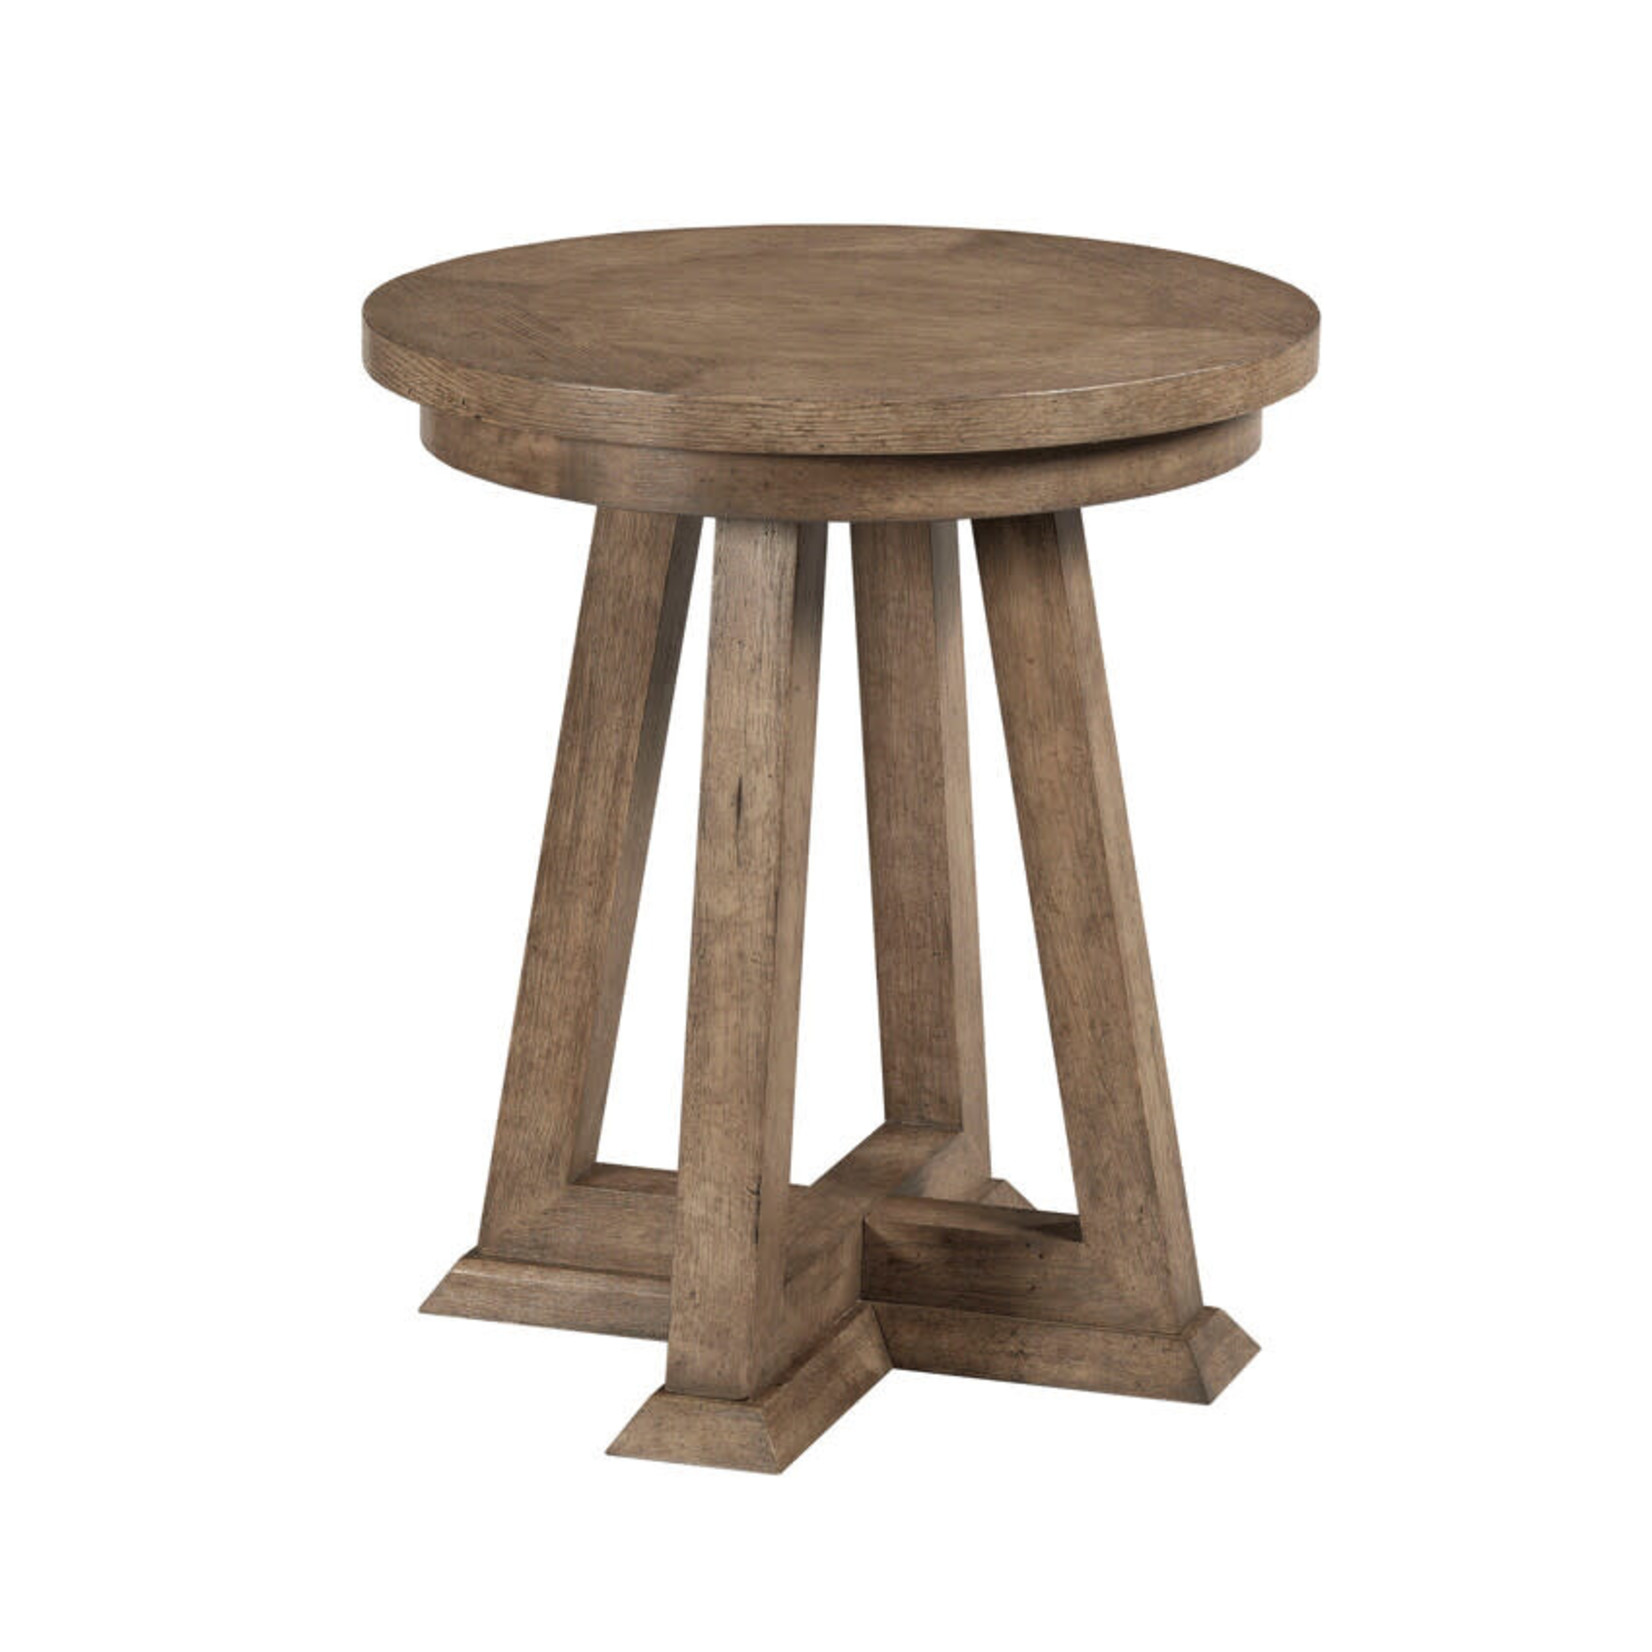 Hammary Evans Chairside Table